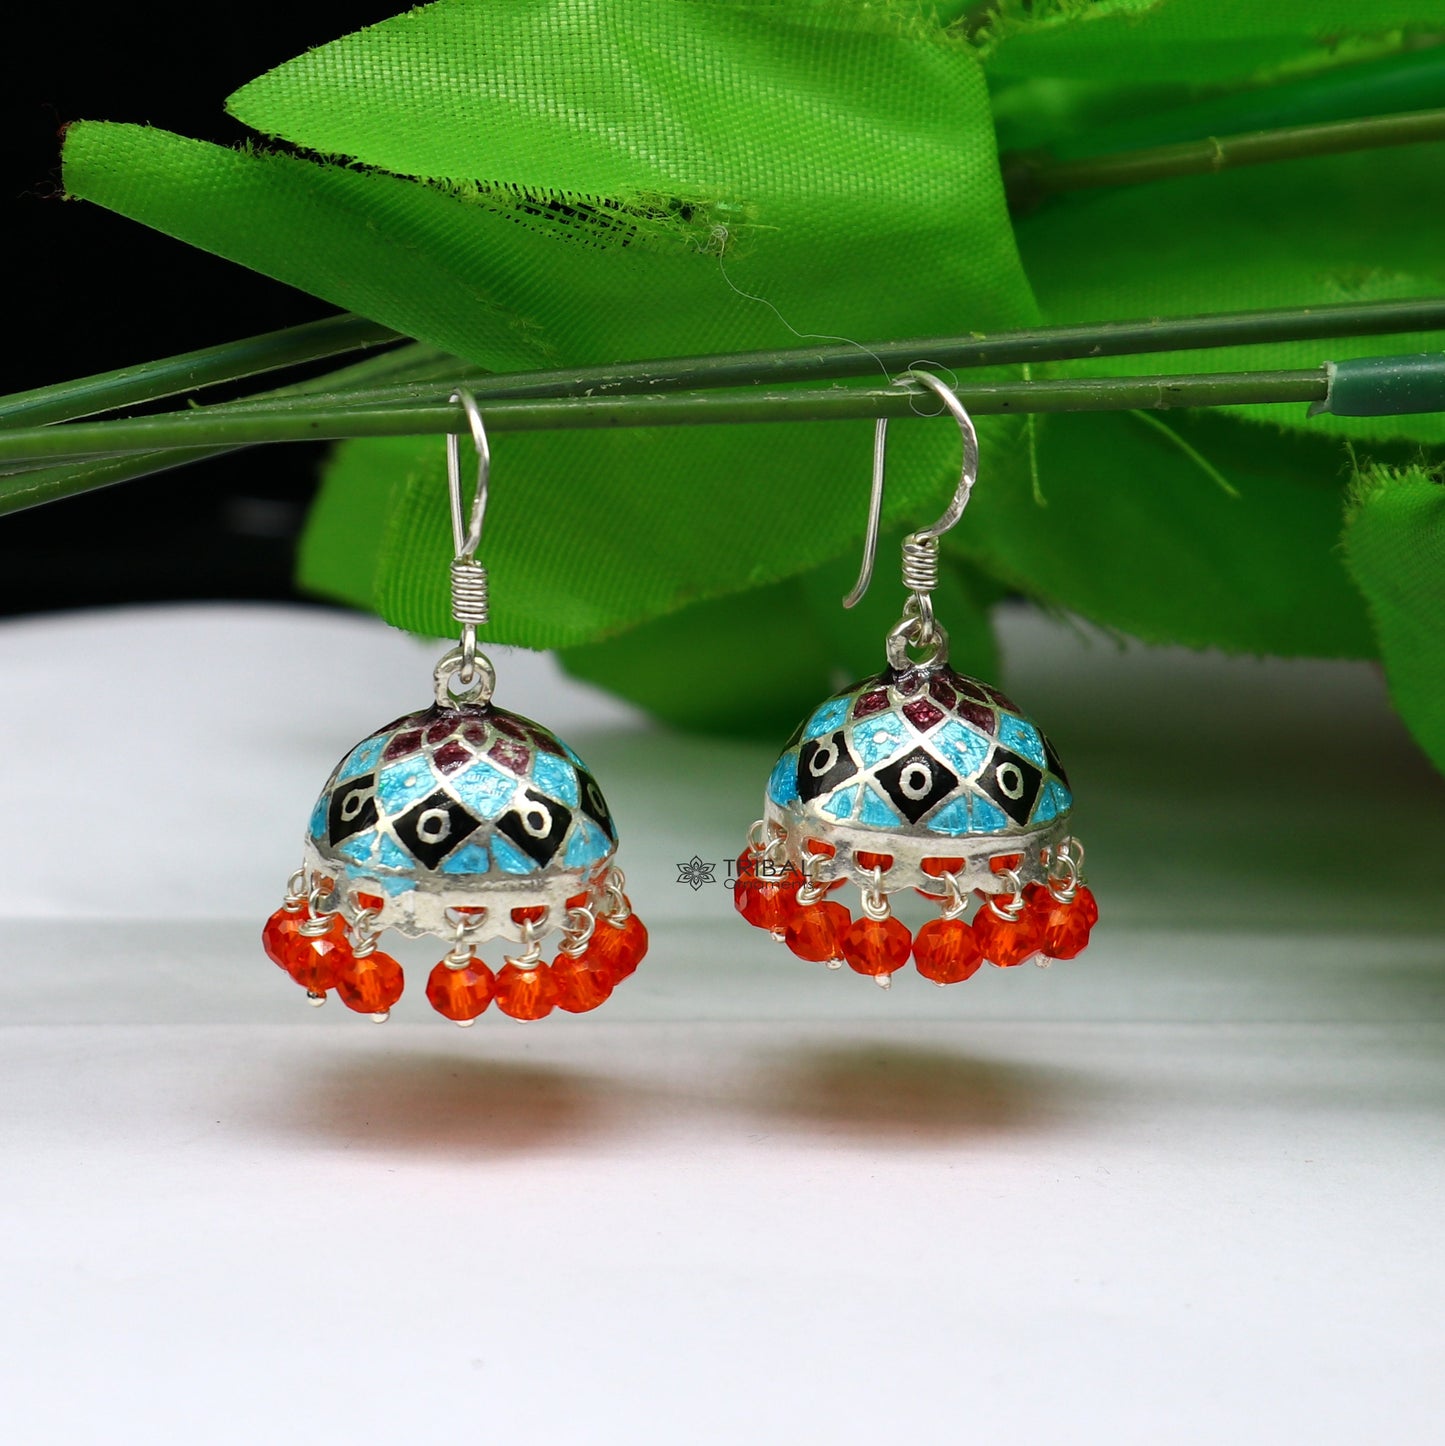 Traditional cultural 925 sterling silver Stylish colorful hoops earring chandelier, enamel work jhumka hanging drops brides earrings  s1185 - TRIBAL ORNAMENTS